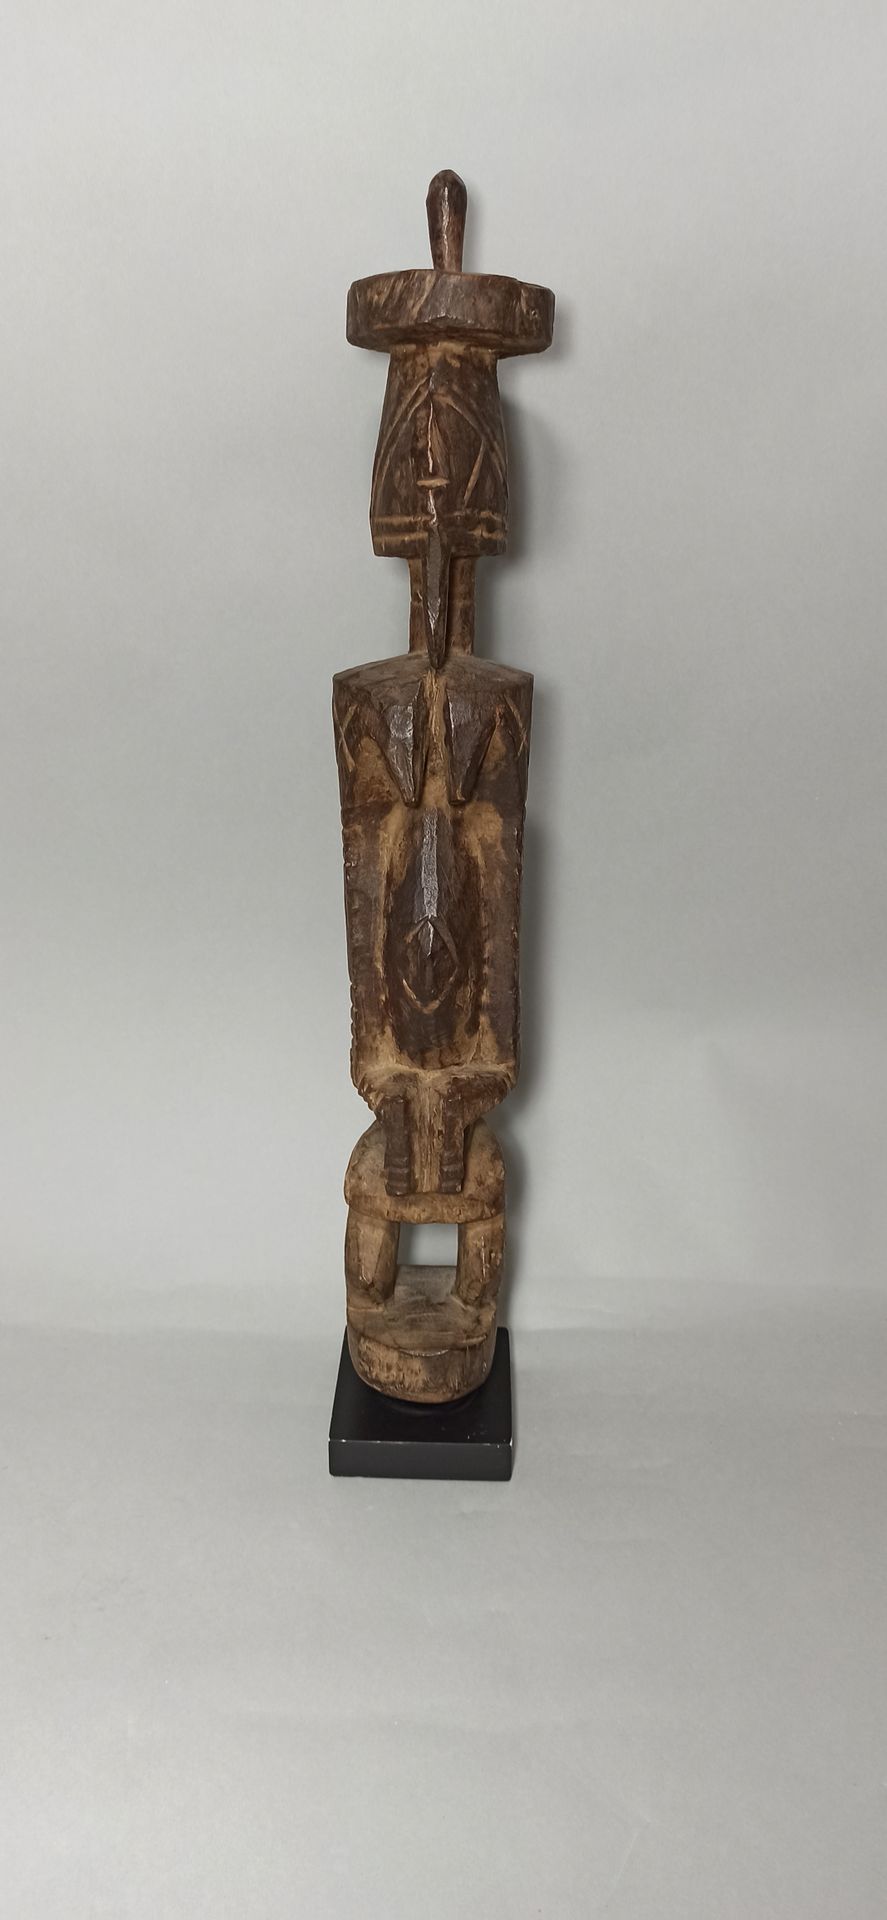 Null DOGON statuette, Mali

Brown patina, crusty in places. Circa 1950.

Height &hellip;